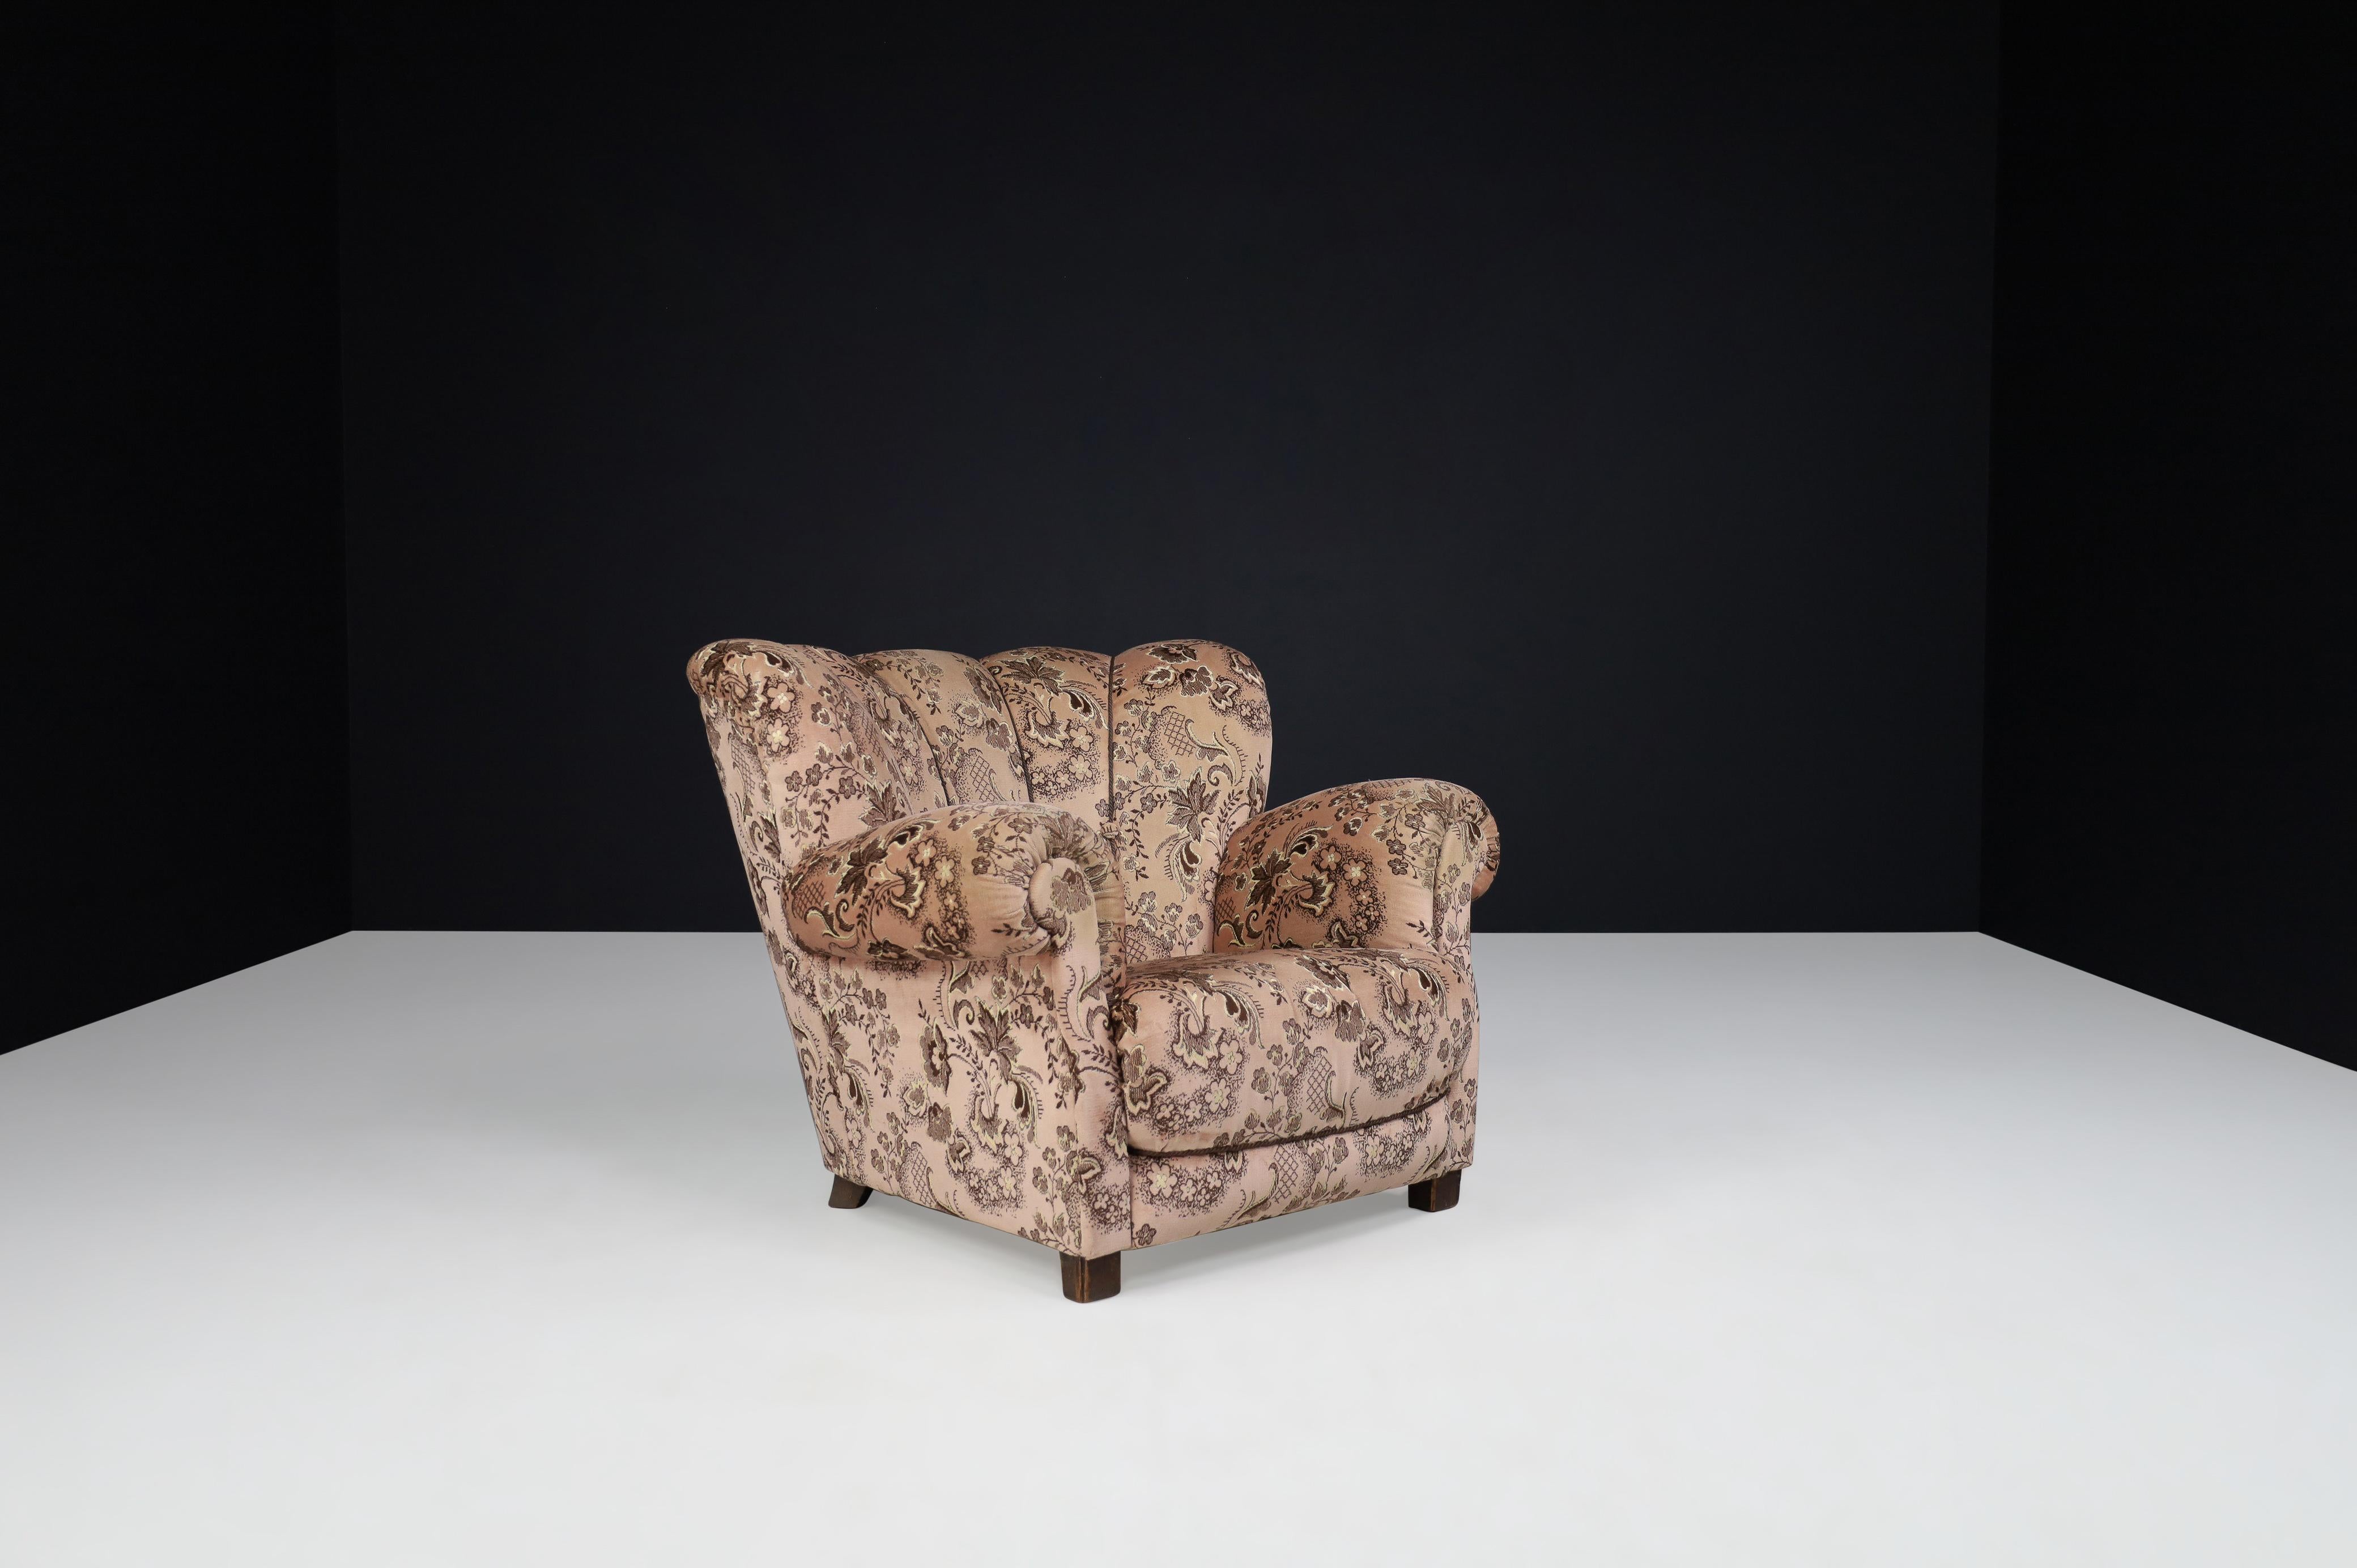 Art Deco Lounge chair in Floral fabric Prague 1930s.

Particular lounge chair in original floral made in Prague and production of the 1930s in Art Deco style. The large armchair has a characteristic, visually exciting shape thanks to its elegant